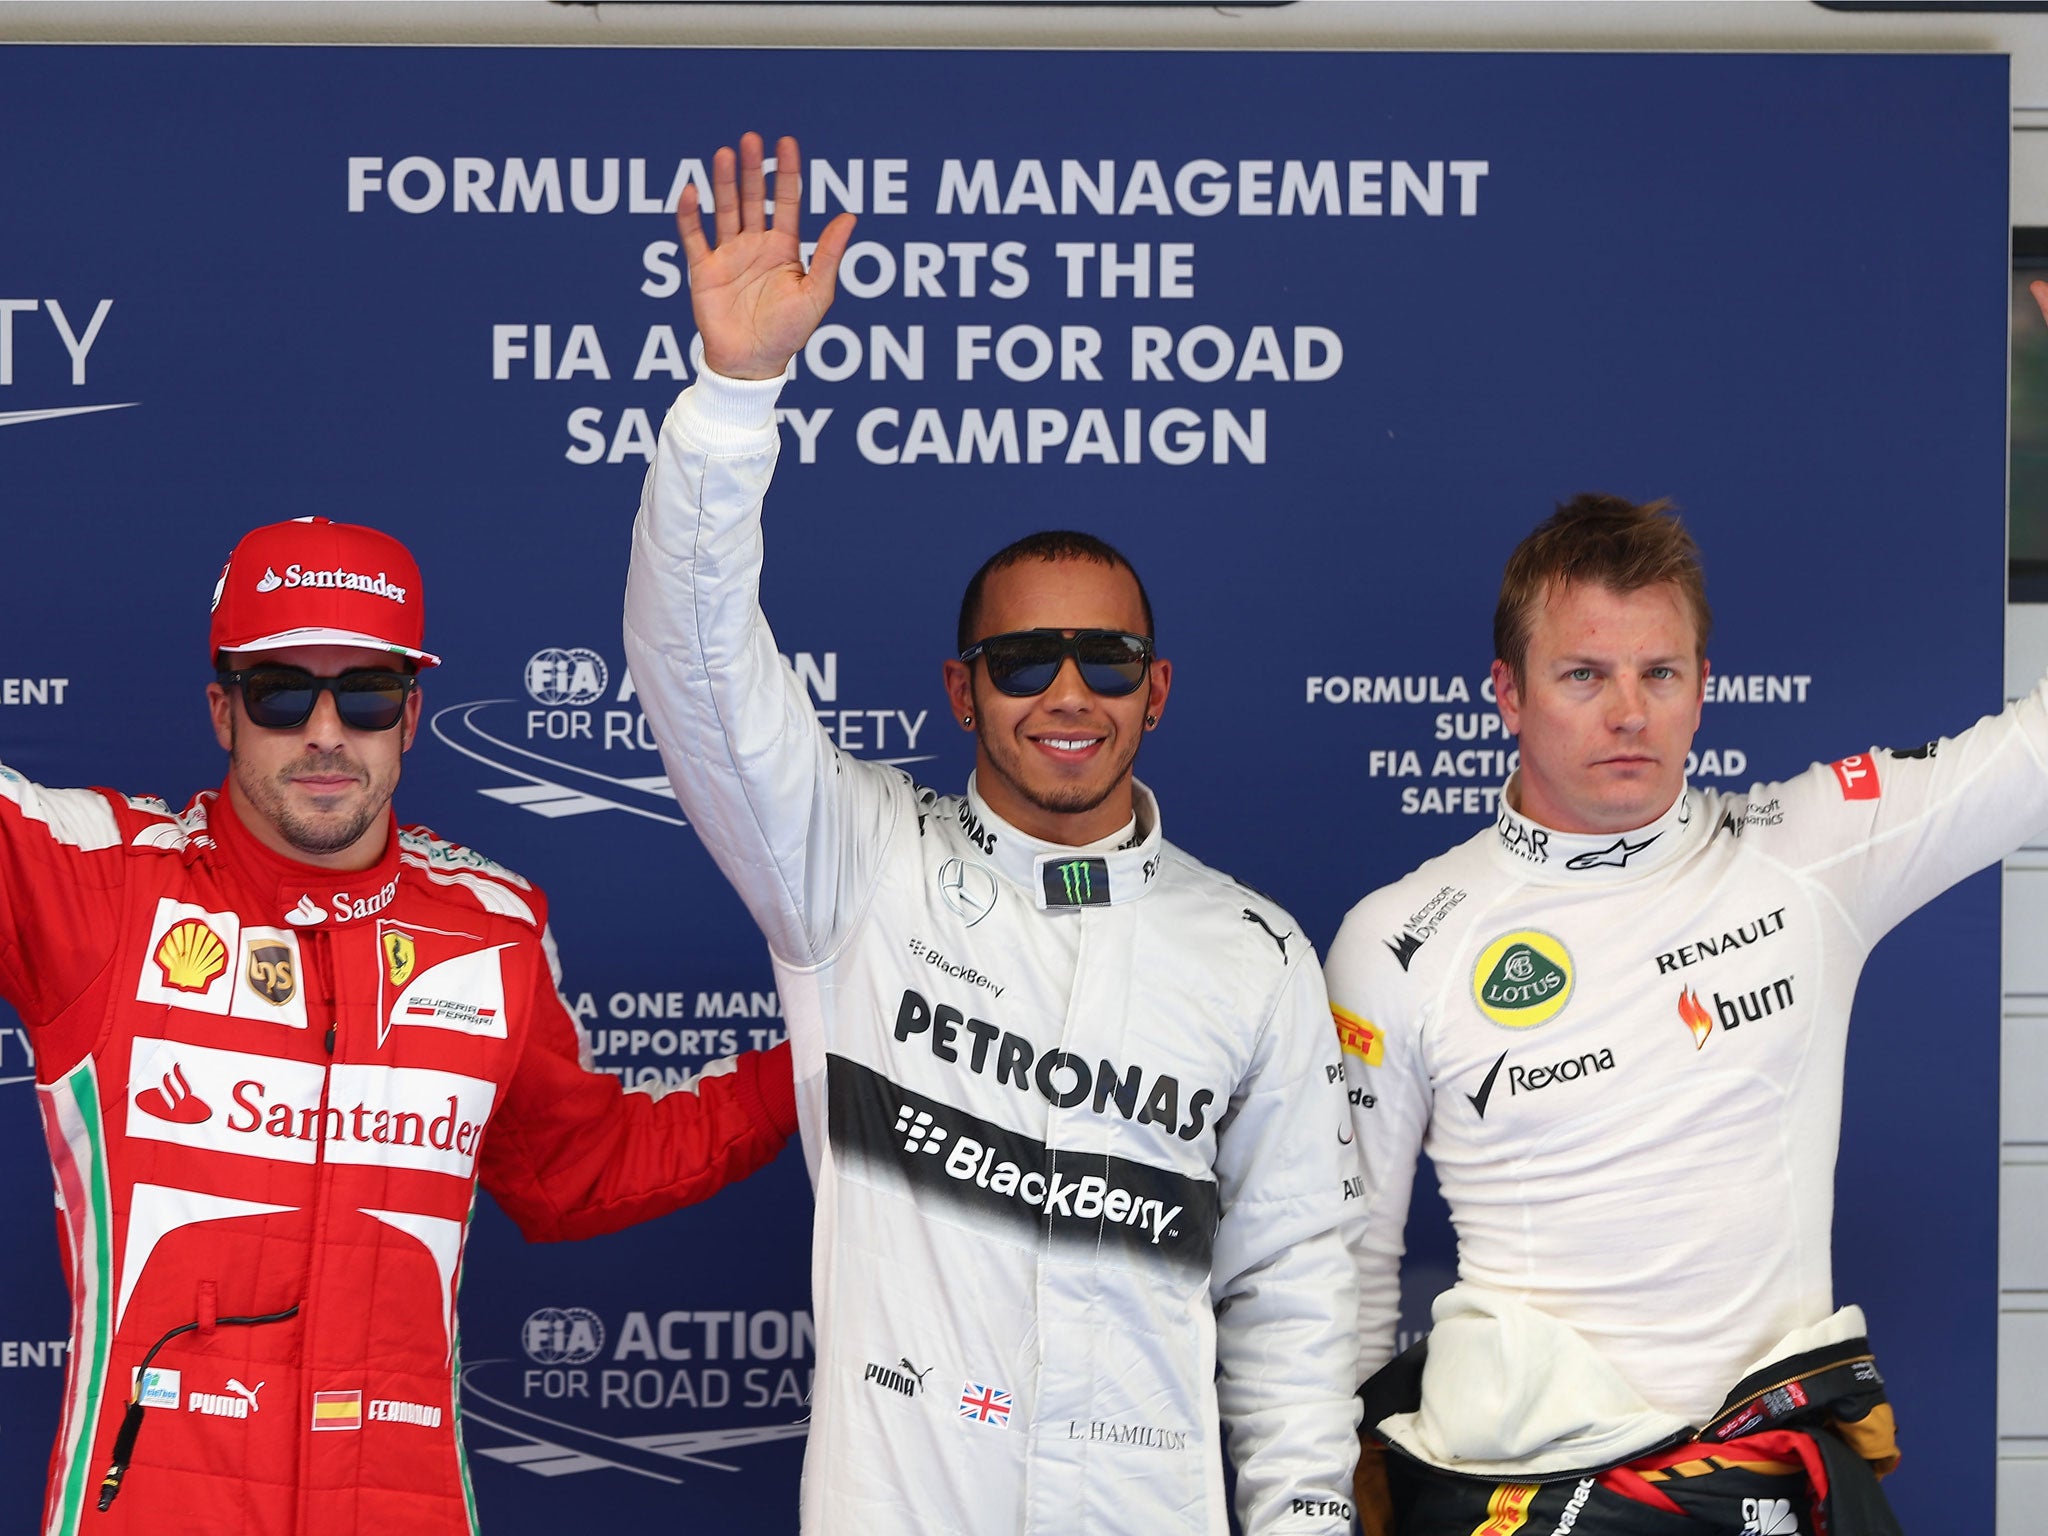 "It's an incredible feeling, I'm so happy to have first place," Hamilton said